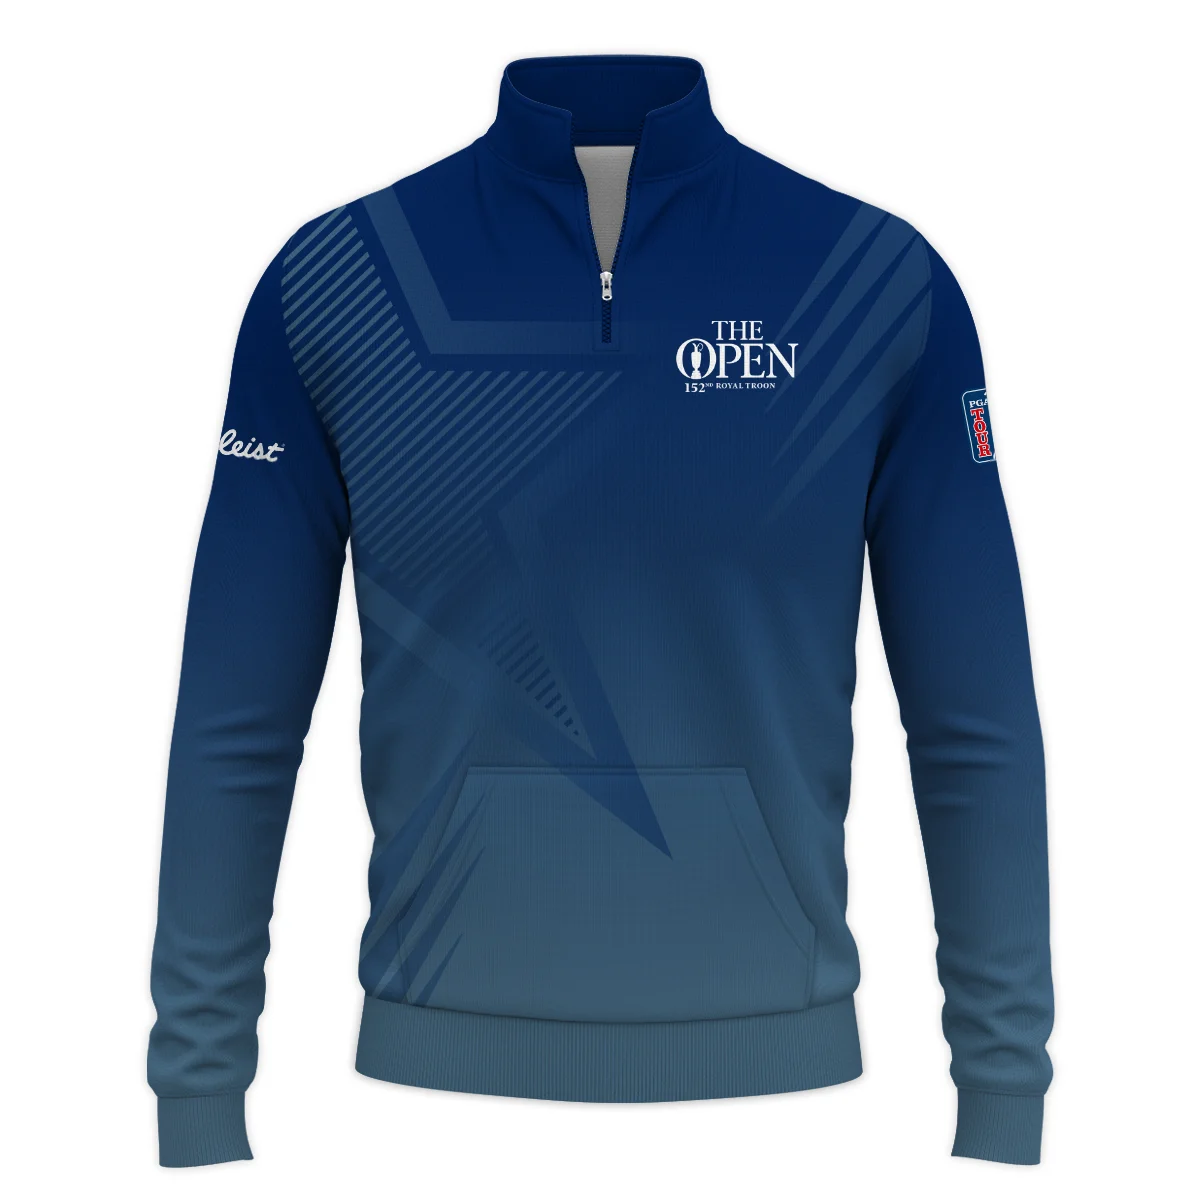 Titleist 152nd Open Championship Abstract Background Dark Blue Gradient Star Line Performance Quarter Zip Sweatshirt With Pockets All Over Prints HOTOP260624A04TLTS